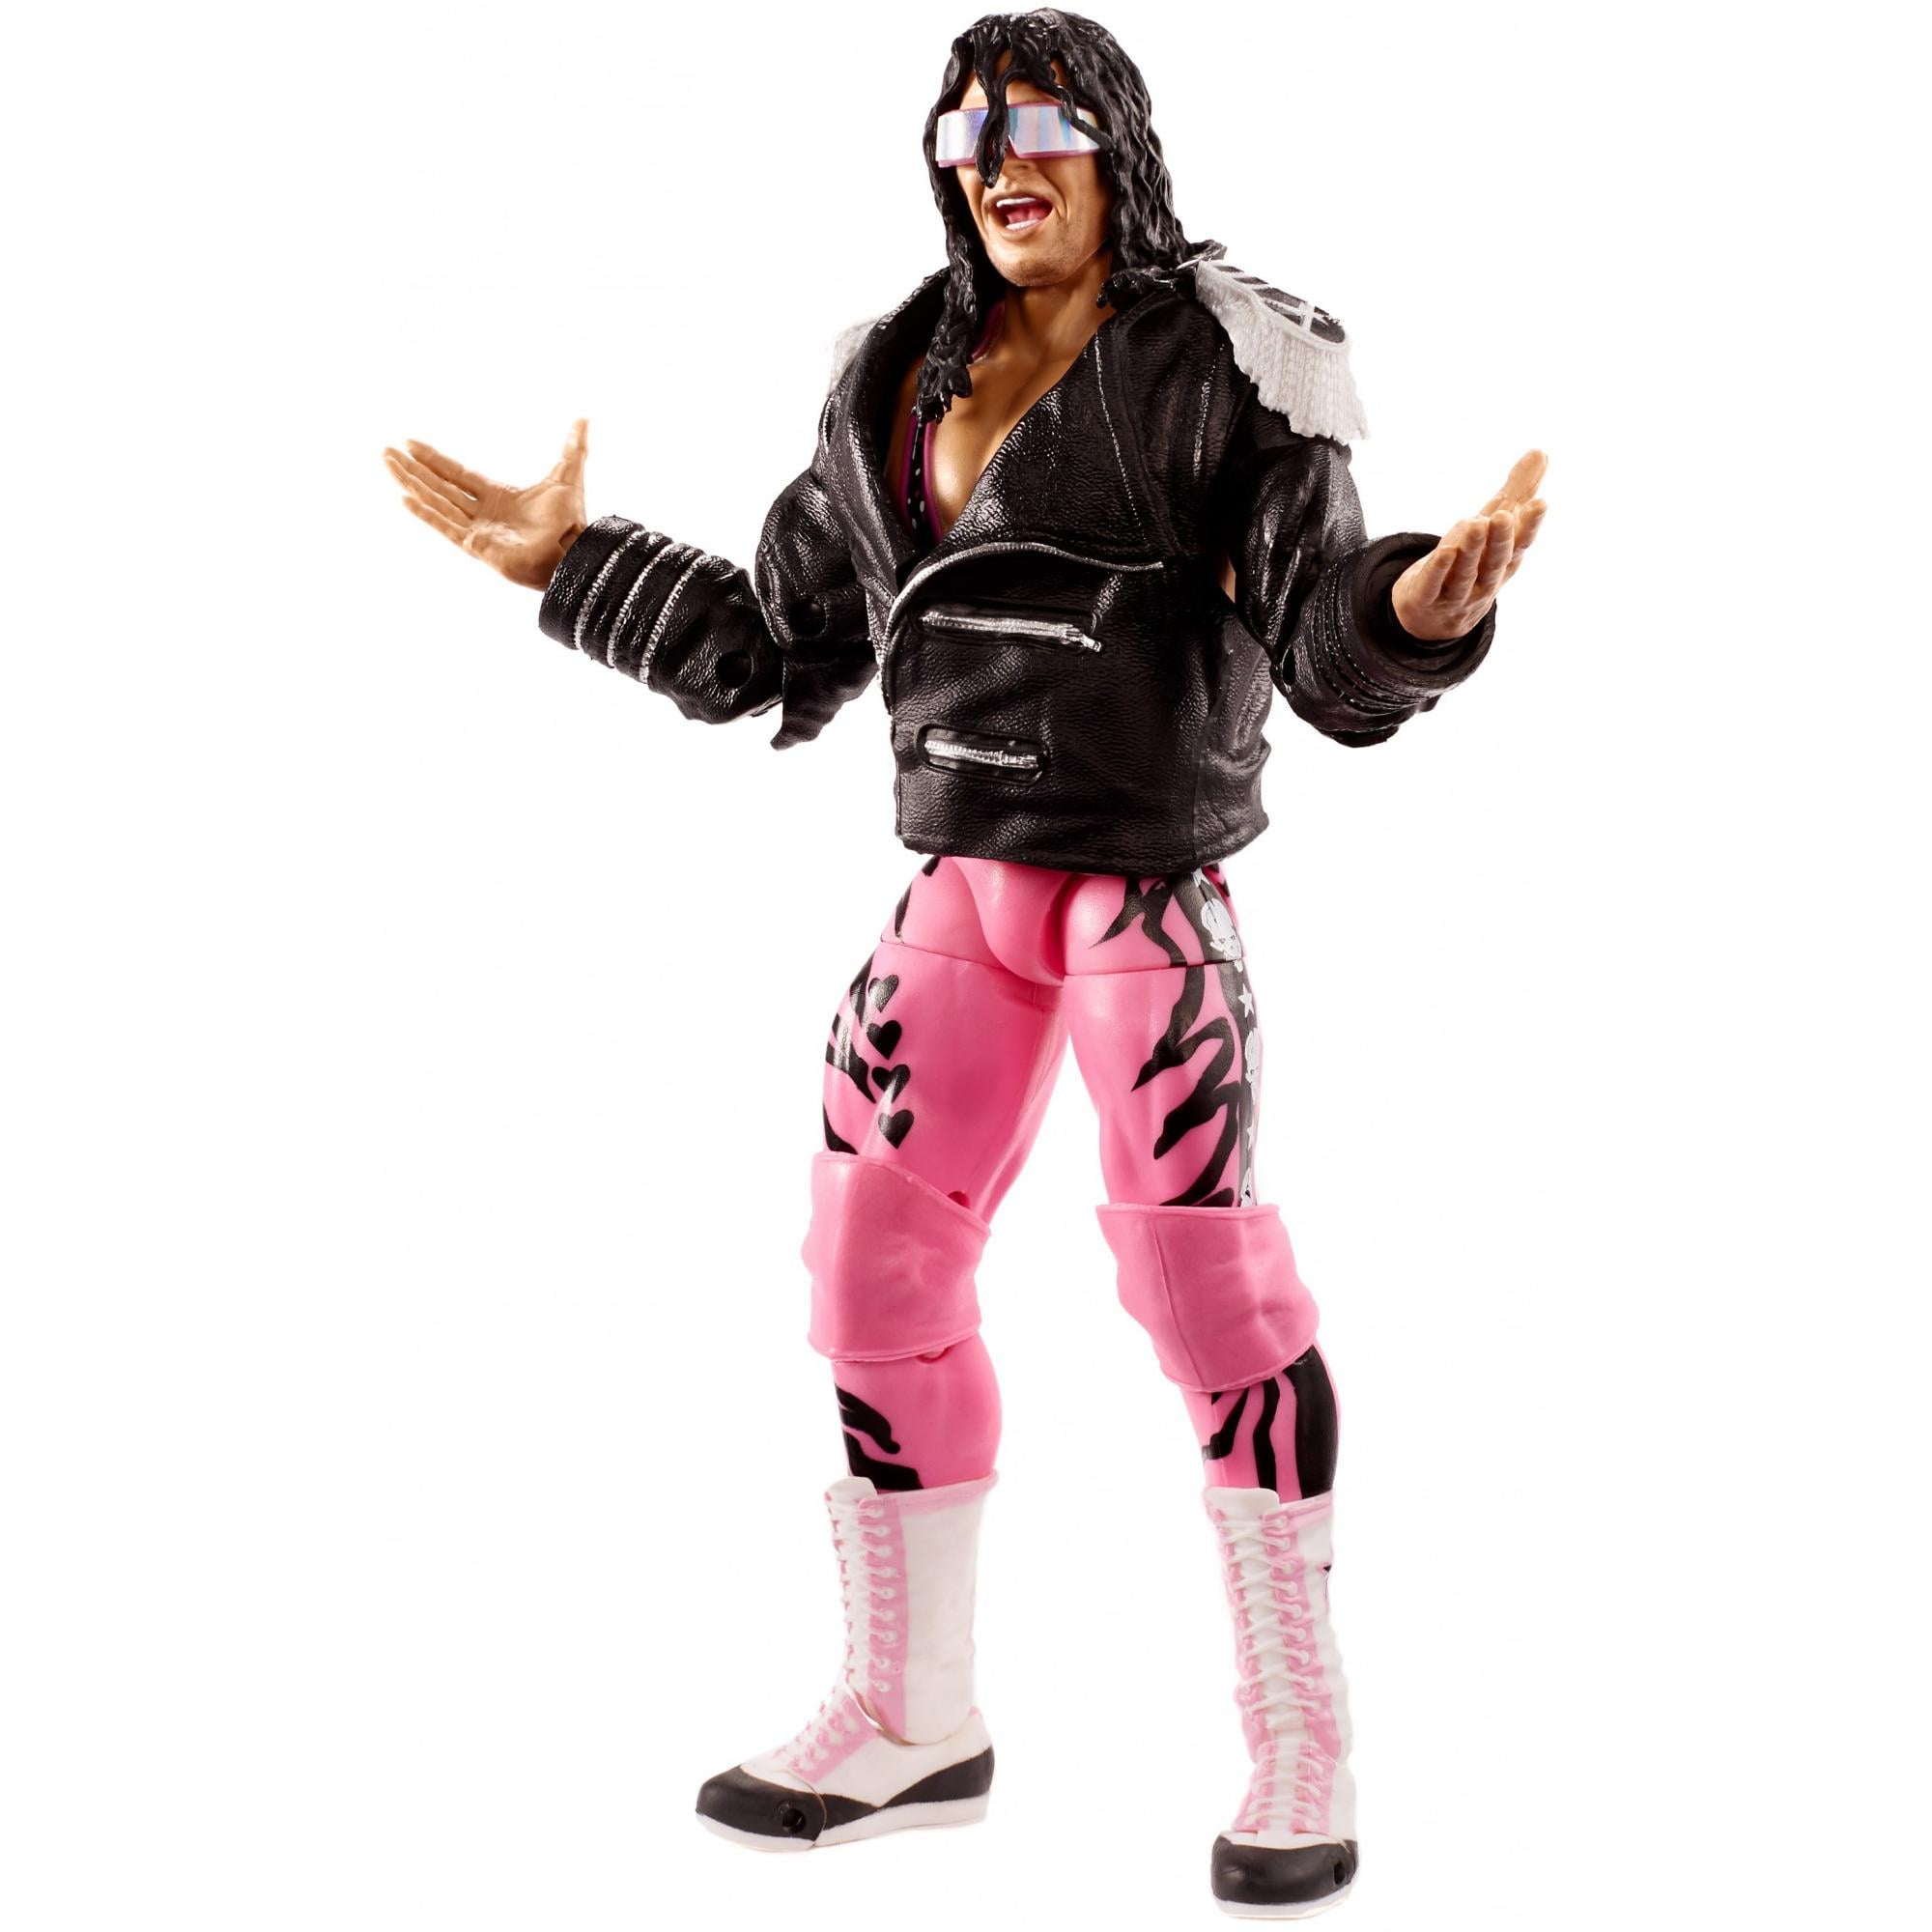 Brand New Bret Hitman Hart Ultimate Edition WWE Elite Action Figure Toy 